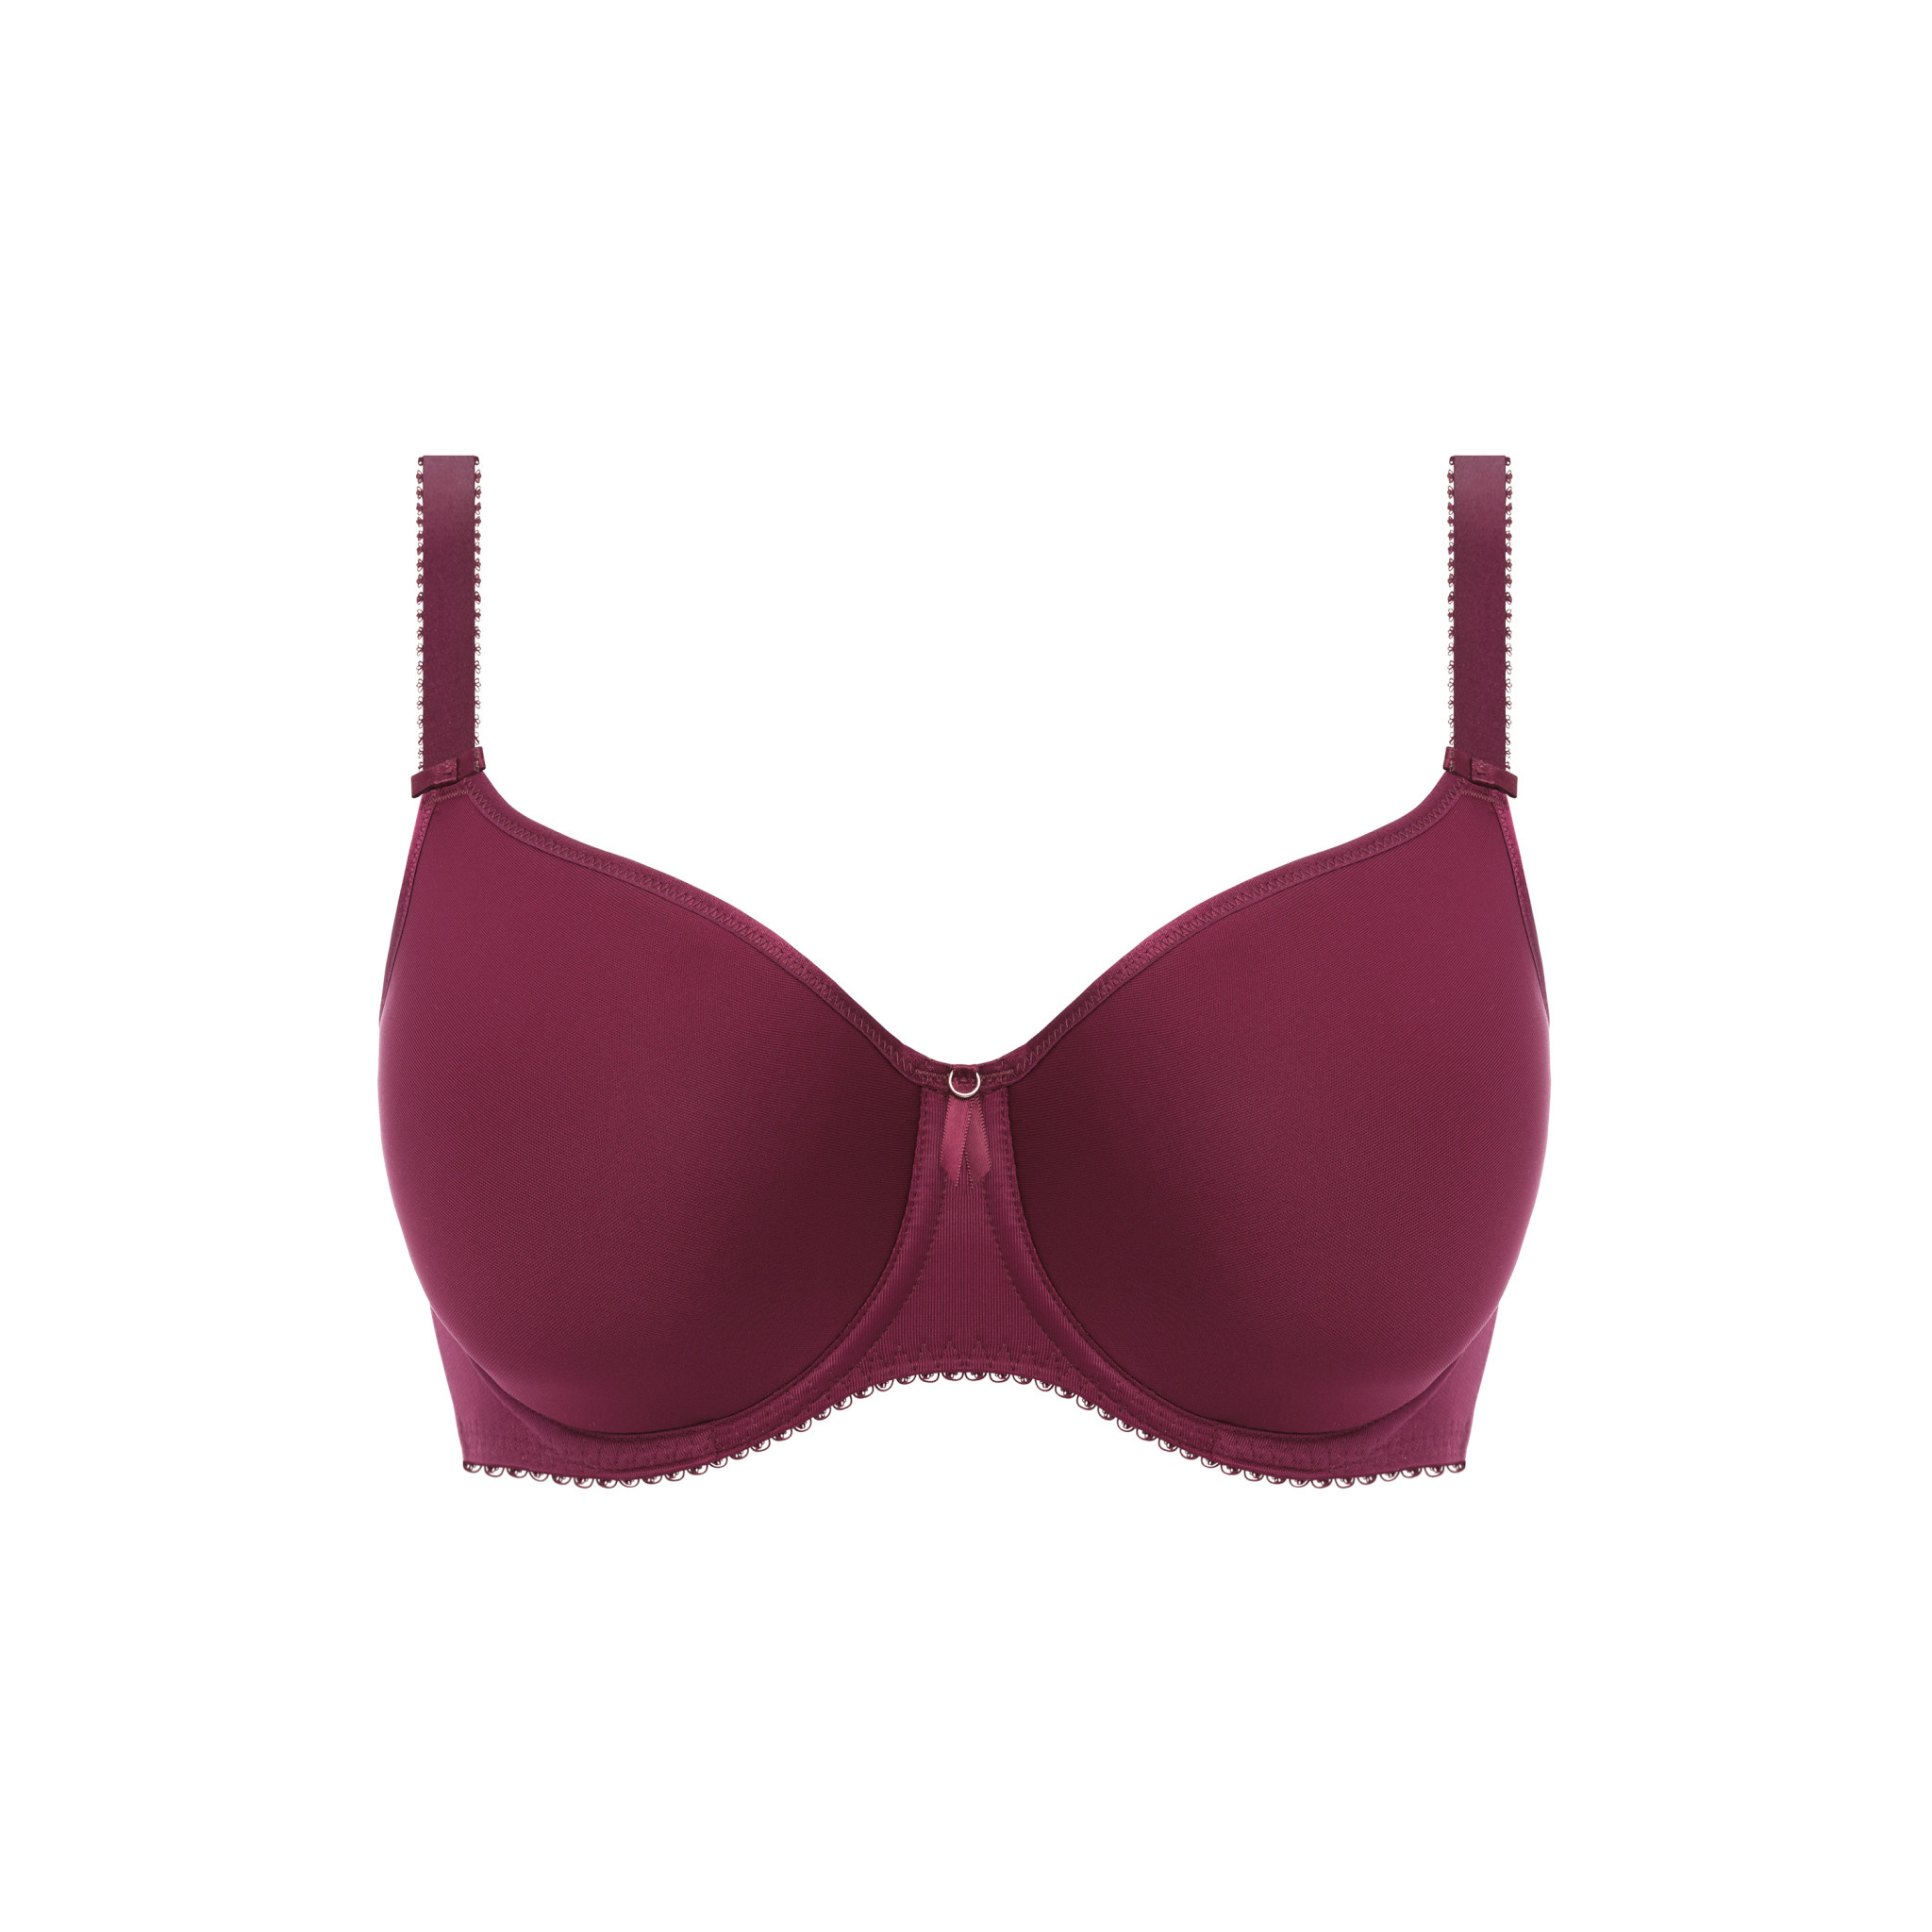 Coup de Foudre Lingerie: perfectly fit bras, underwear, sleepwear and  lingerie for the everyday woman